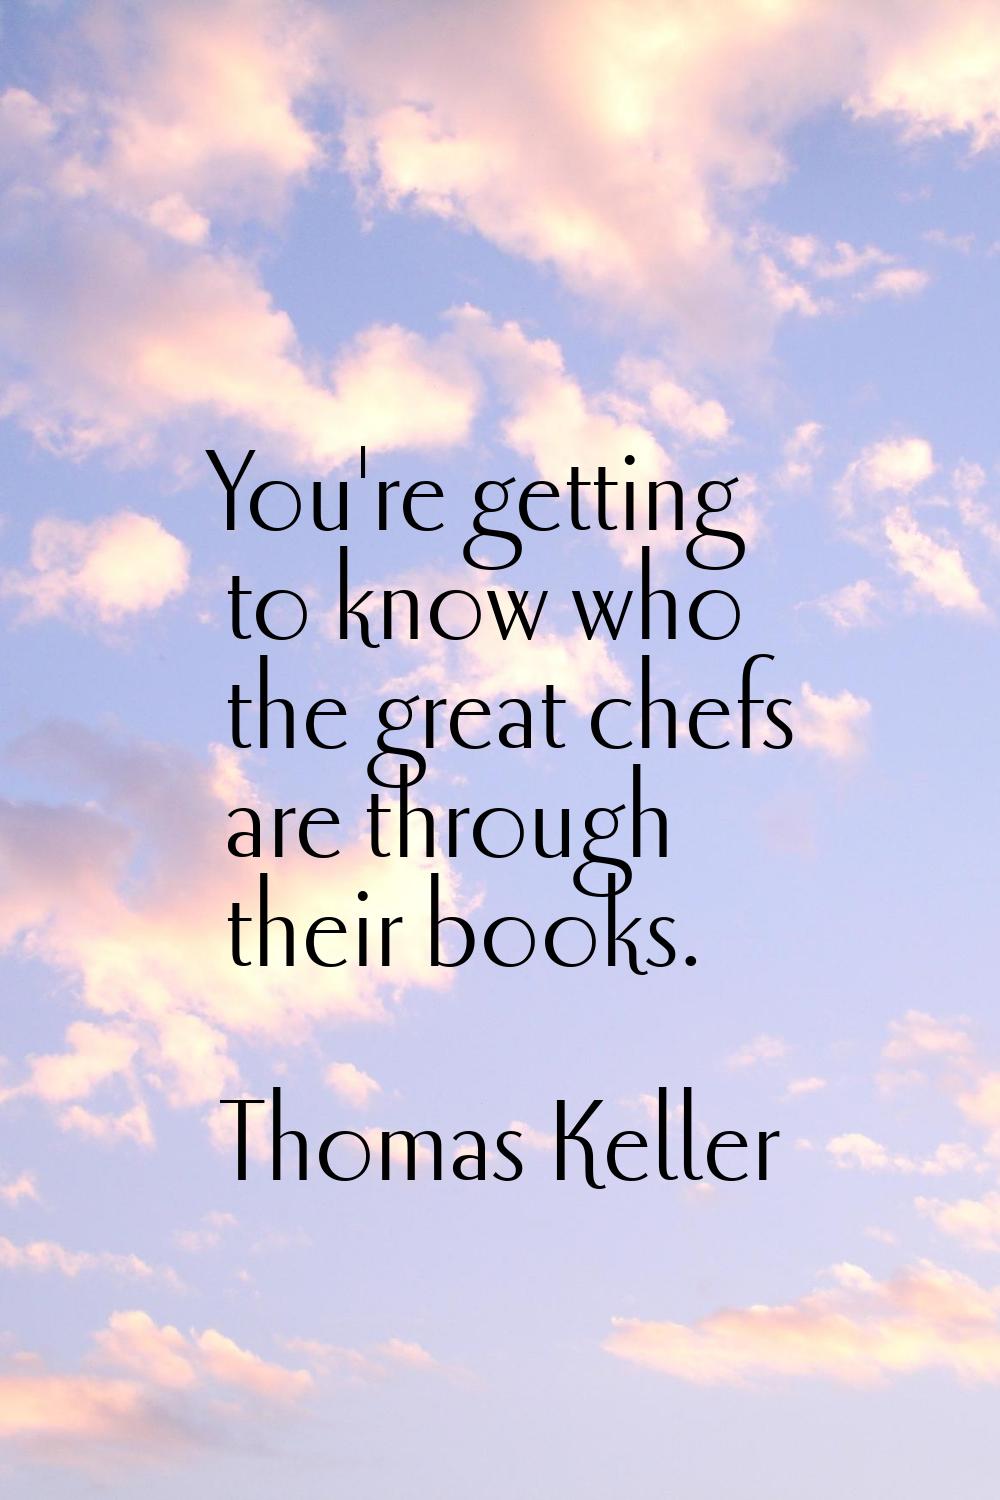 You're getting to know who the great chefs are through their books.